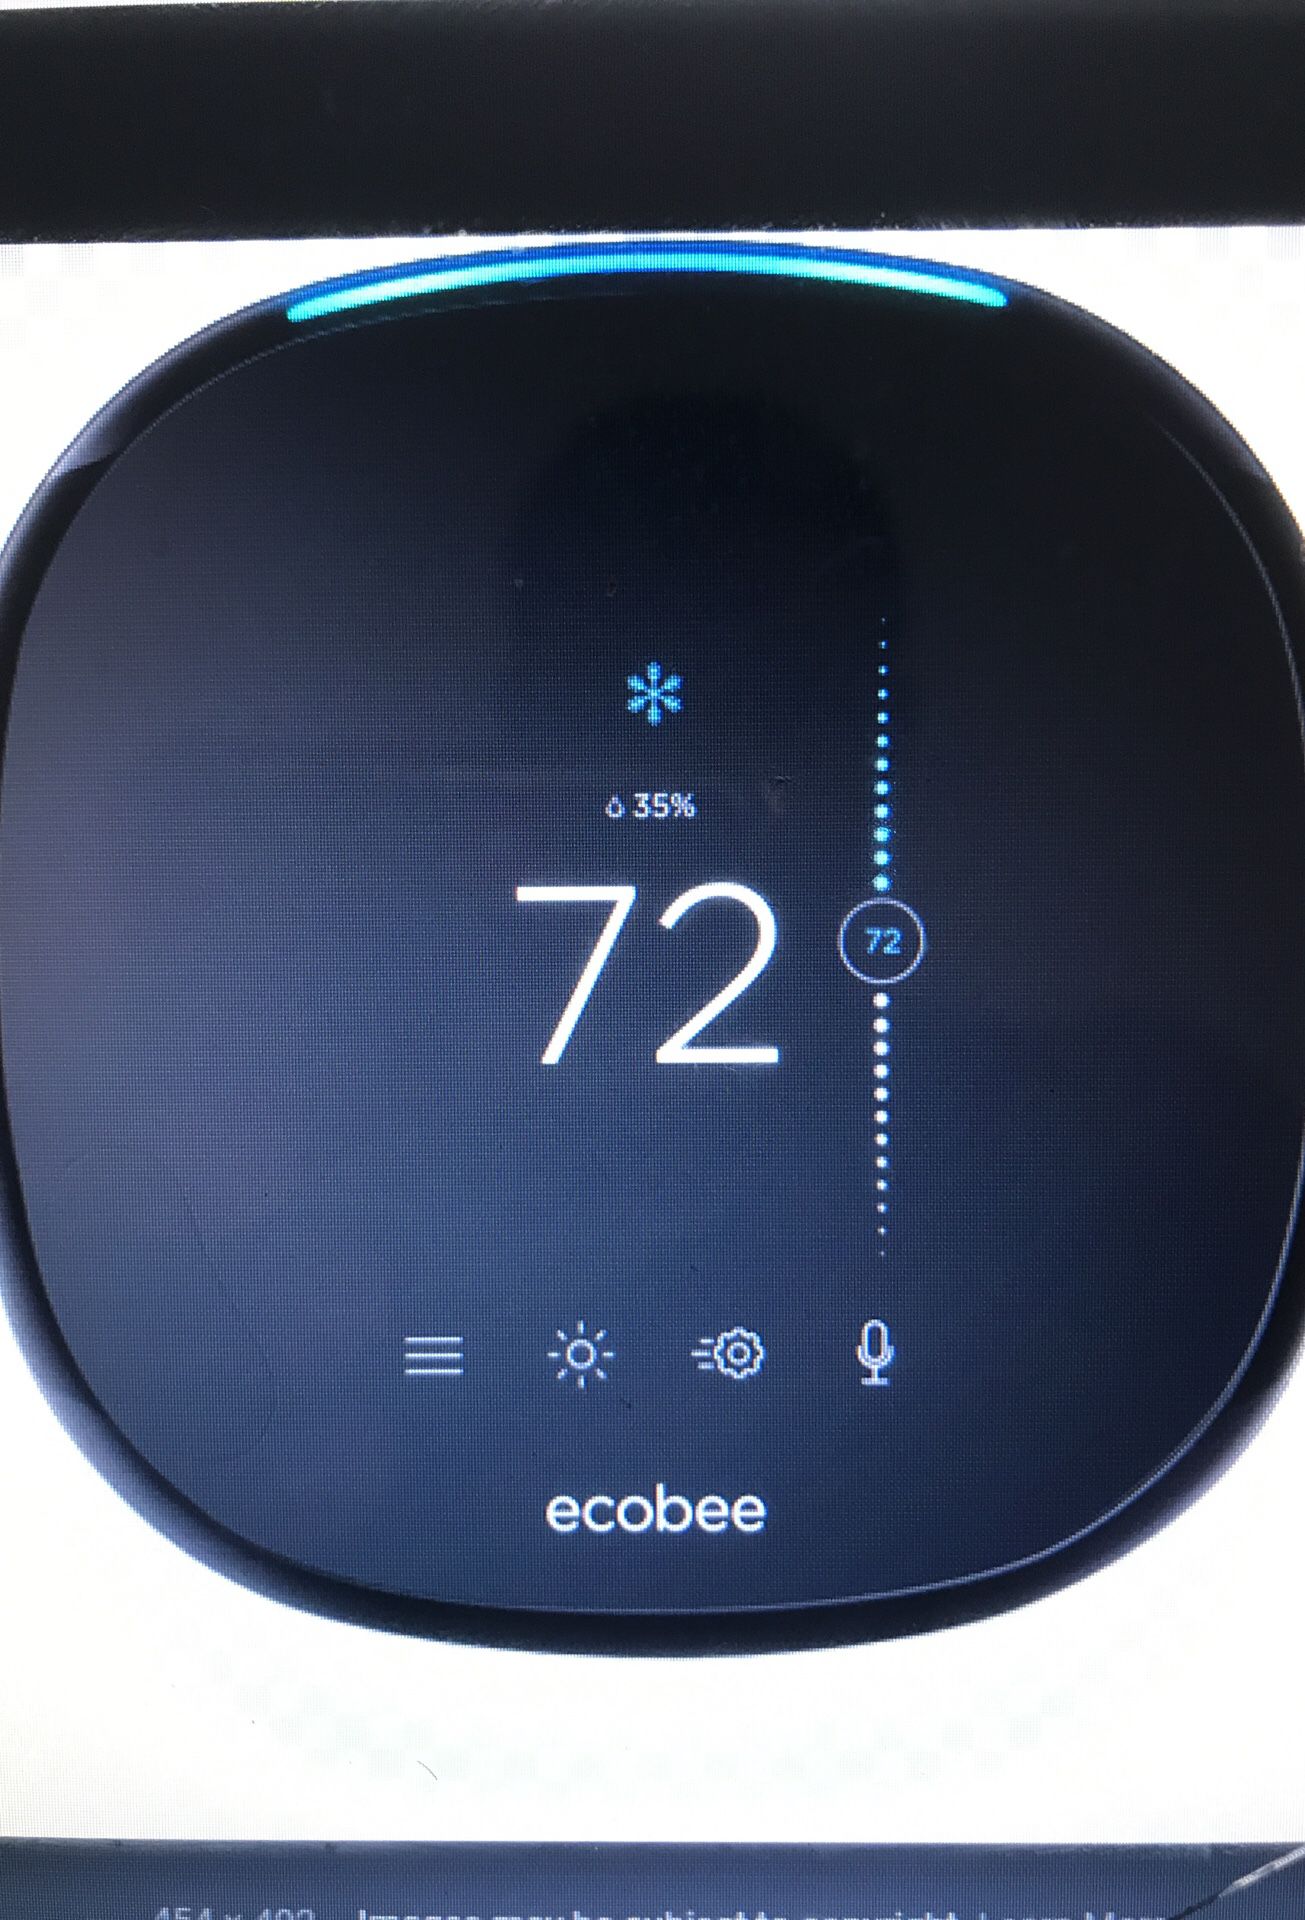 I need my ecobee smart thermostat to be installed for a reasonable price